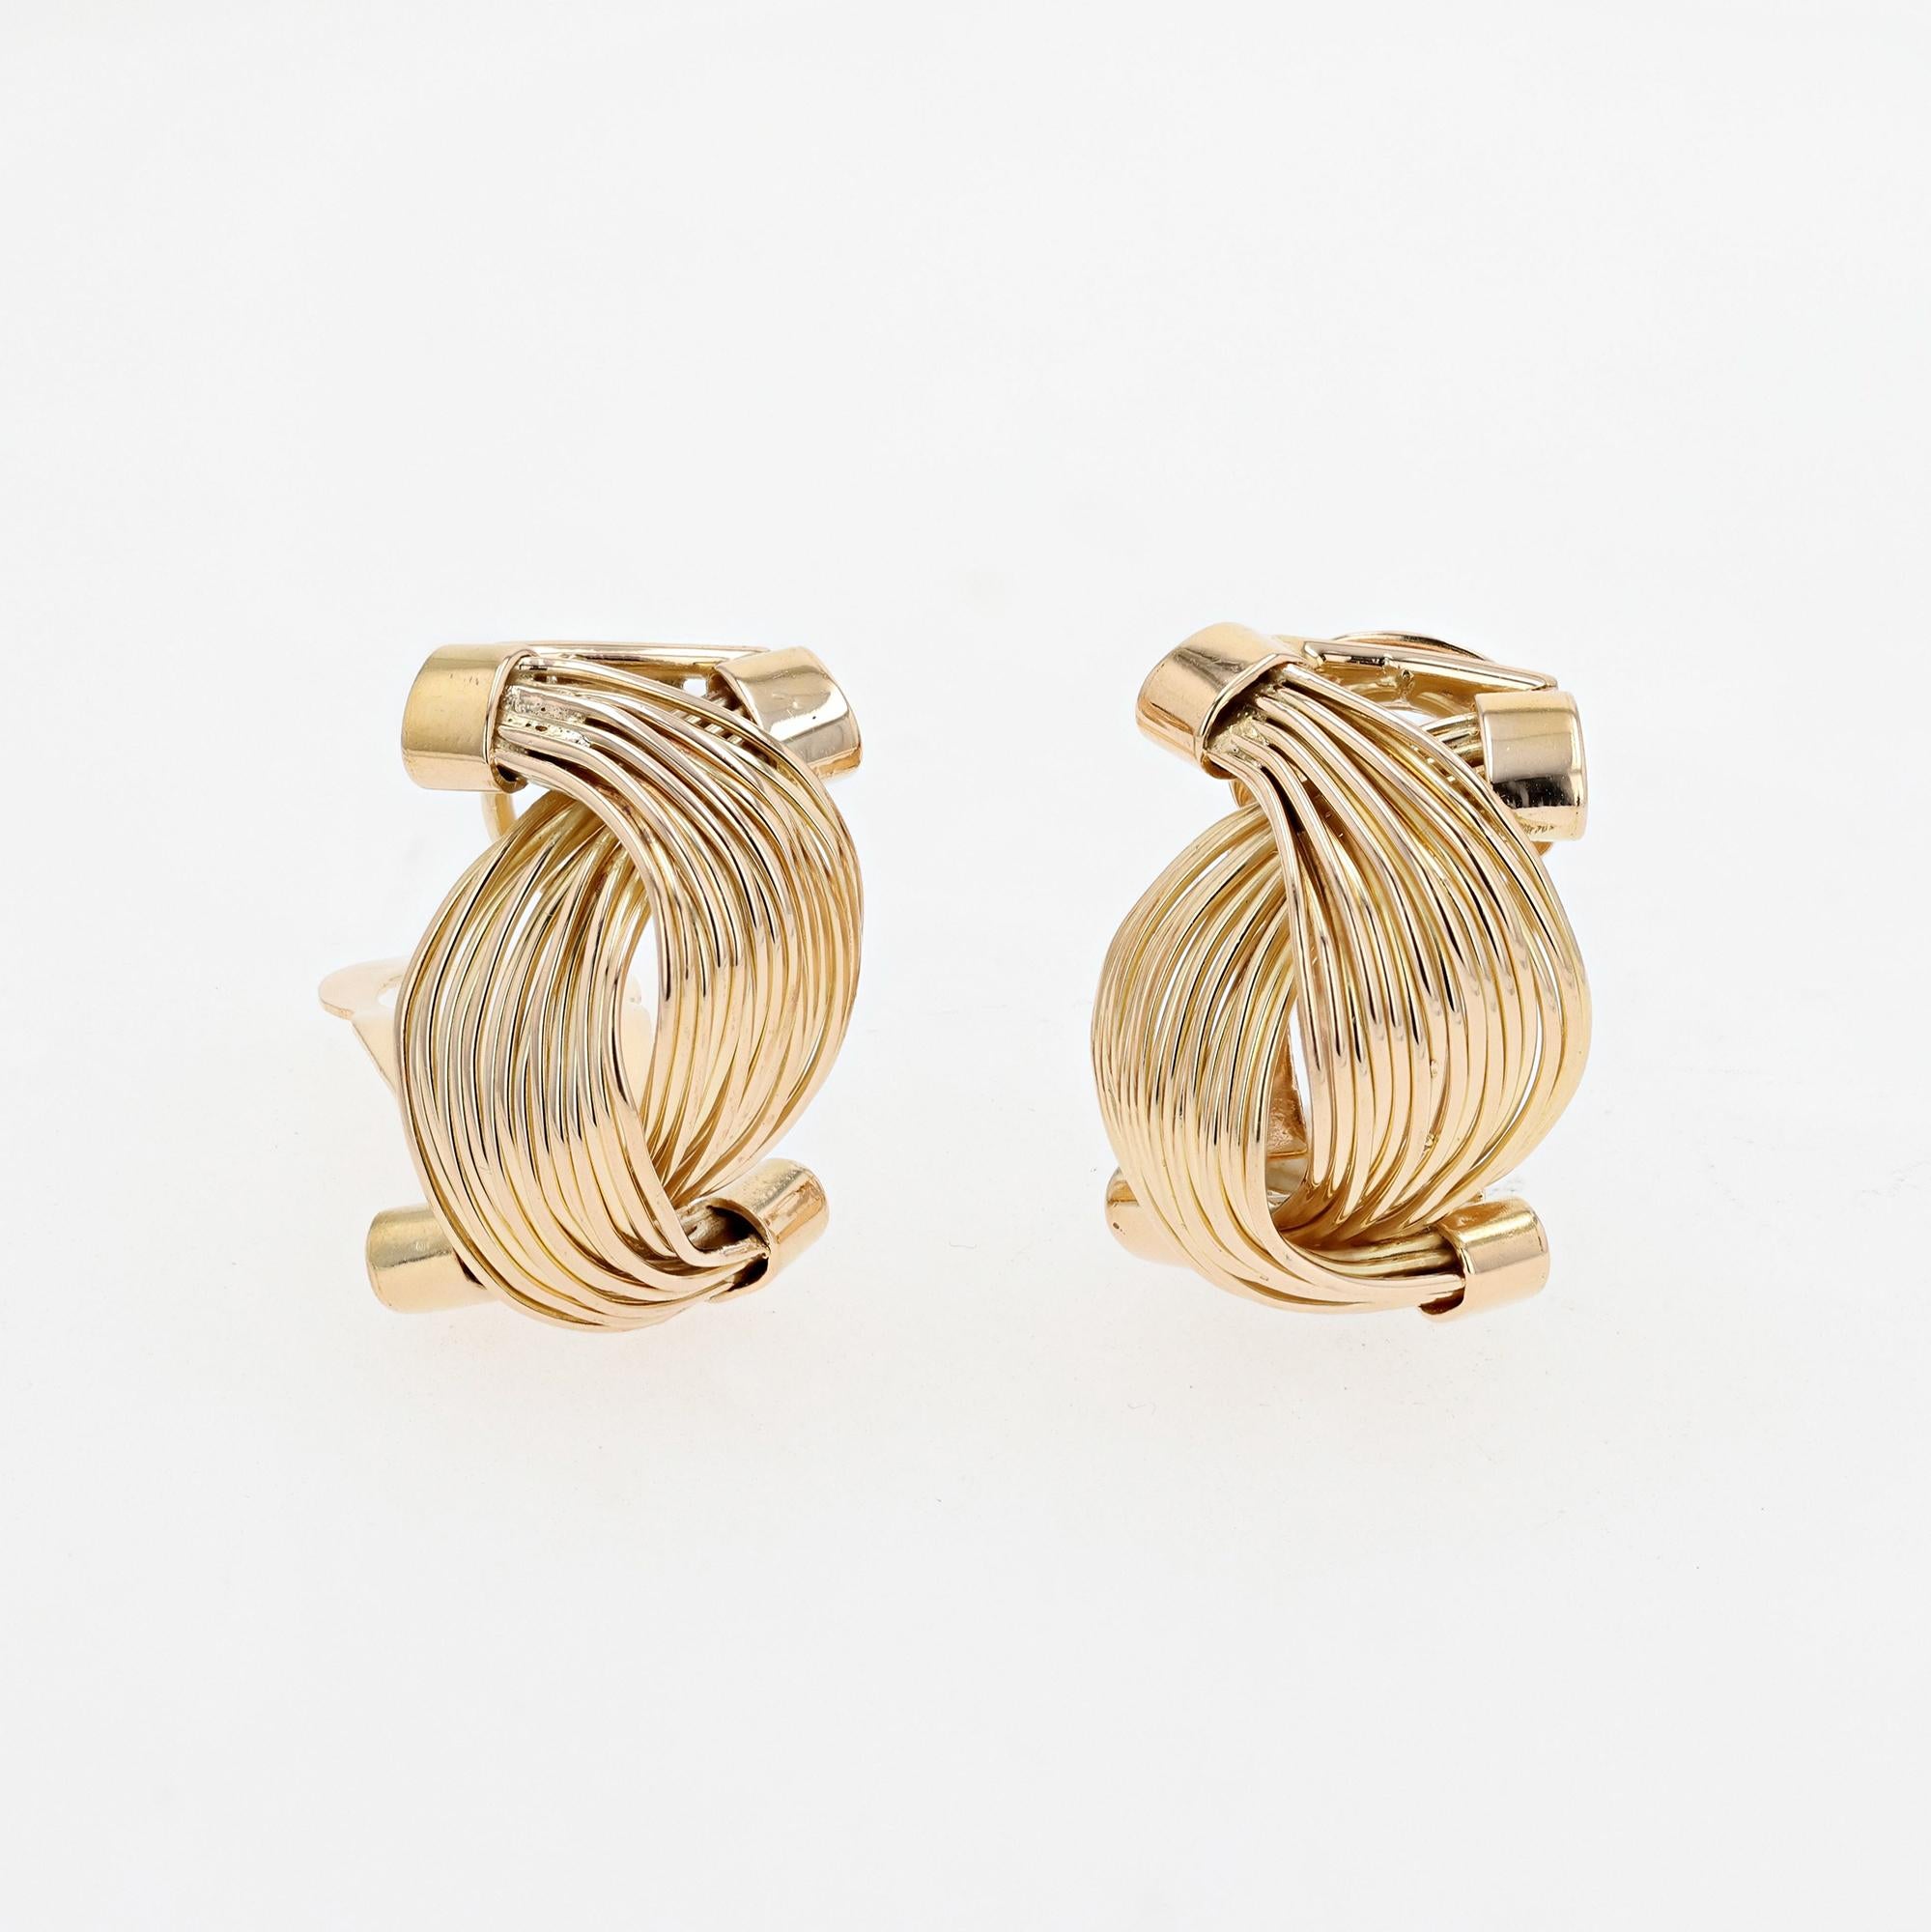 Vintage 18 Yellow Gold  Post War (circa 1950s) handmade sculptural wire wrap swirl ear clips
with posts and Omega backs.  Hallmarked (14.5 grams).  Complimentary bracelet is being sold as well.
